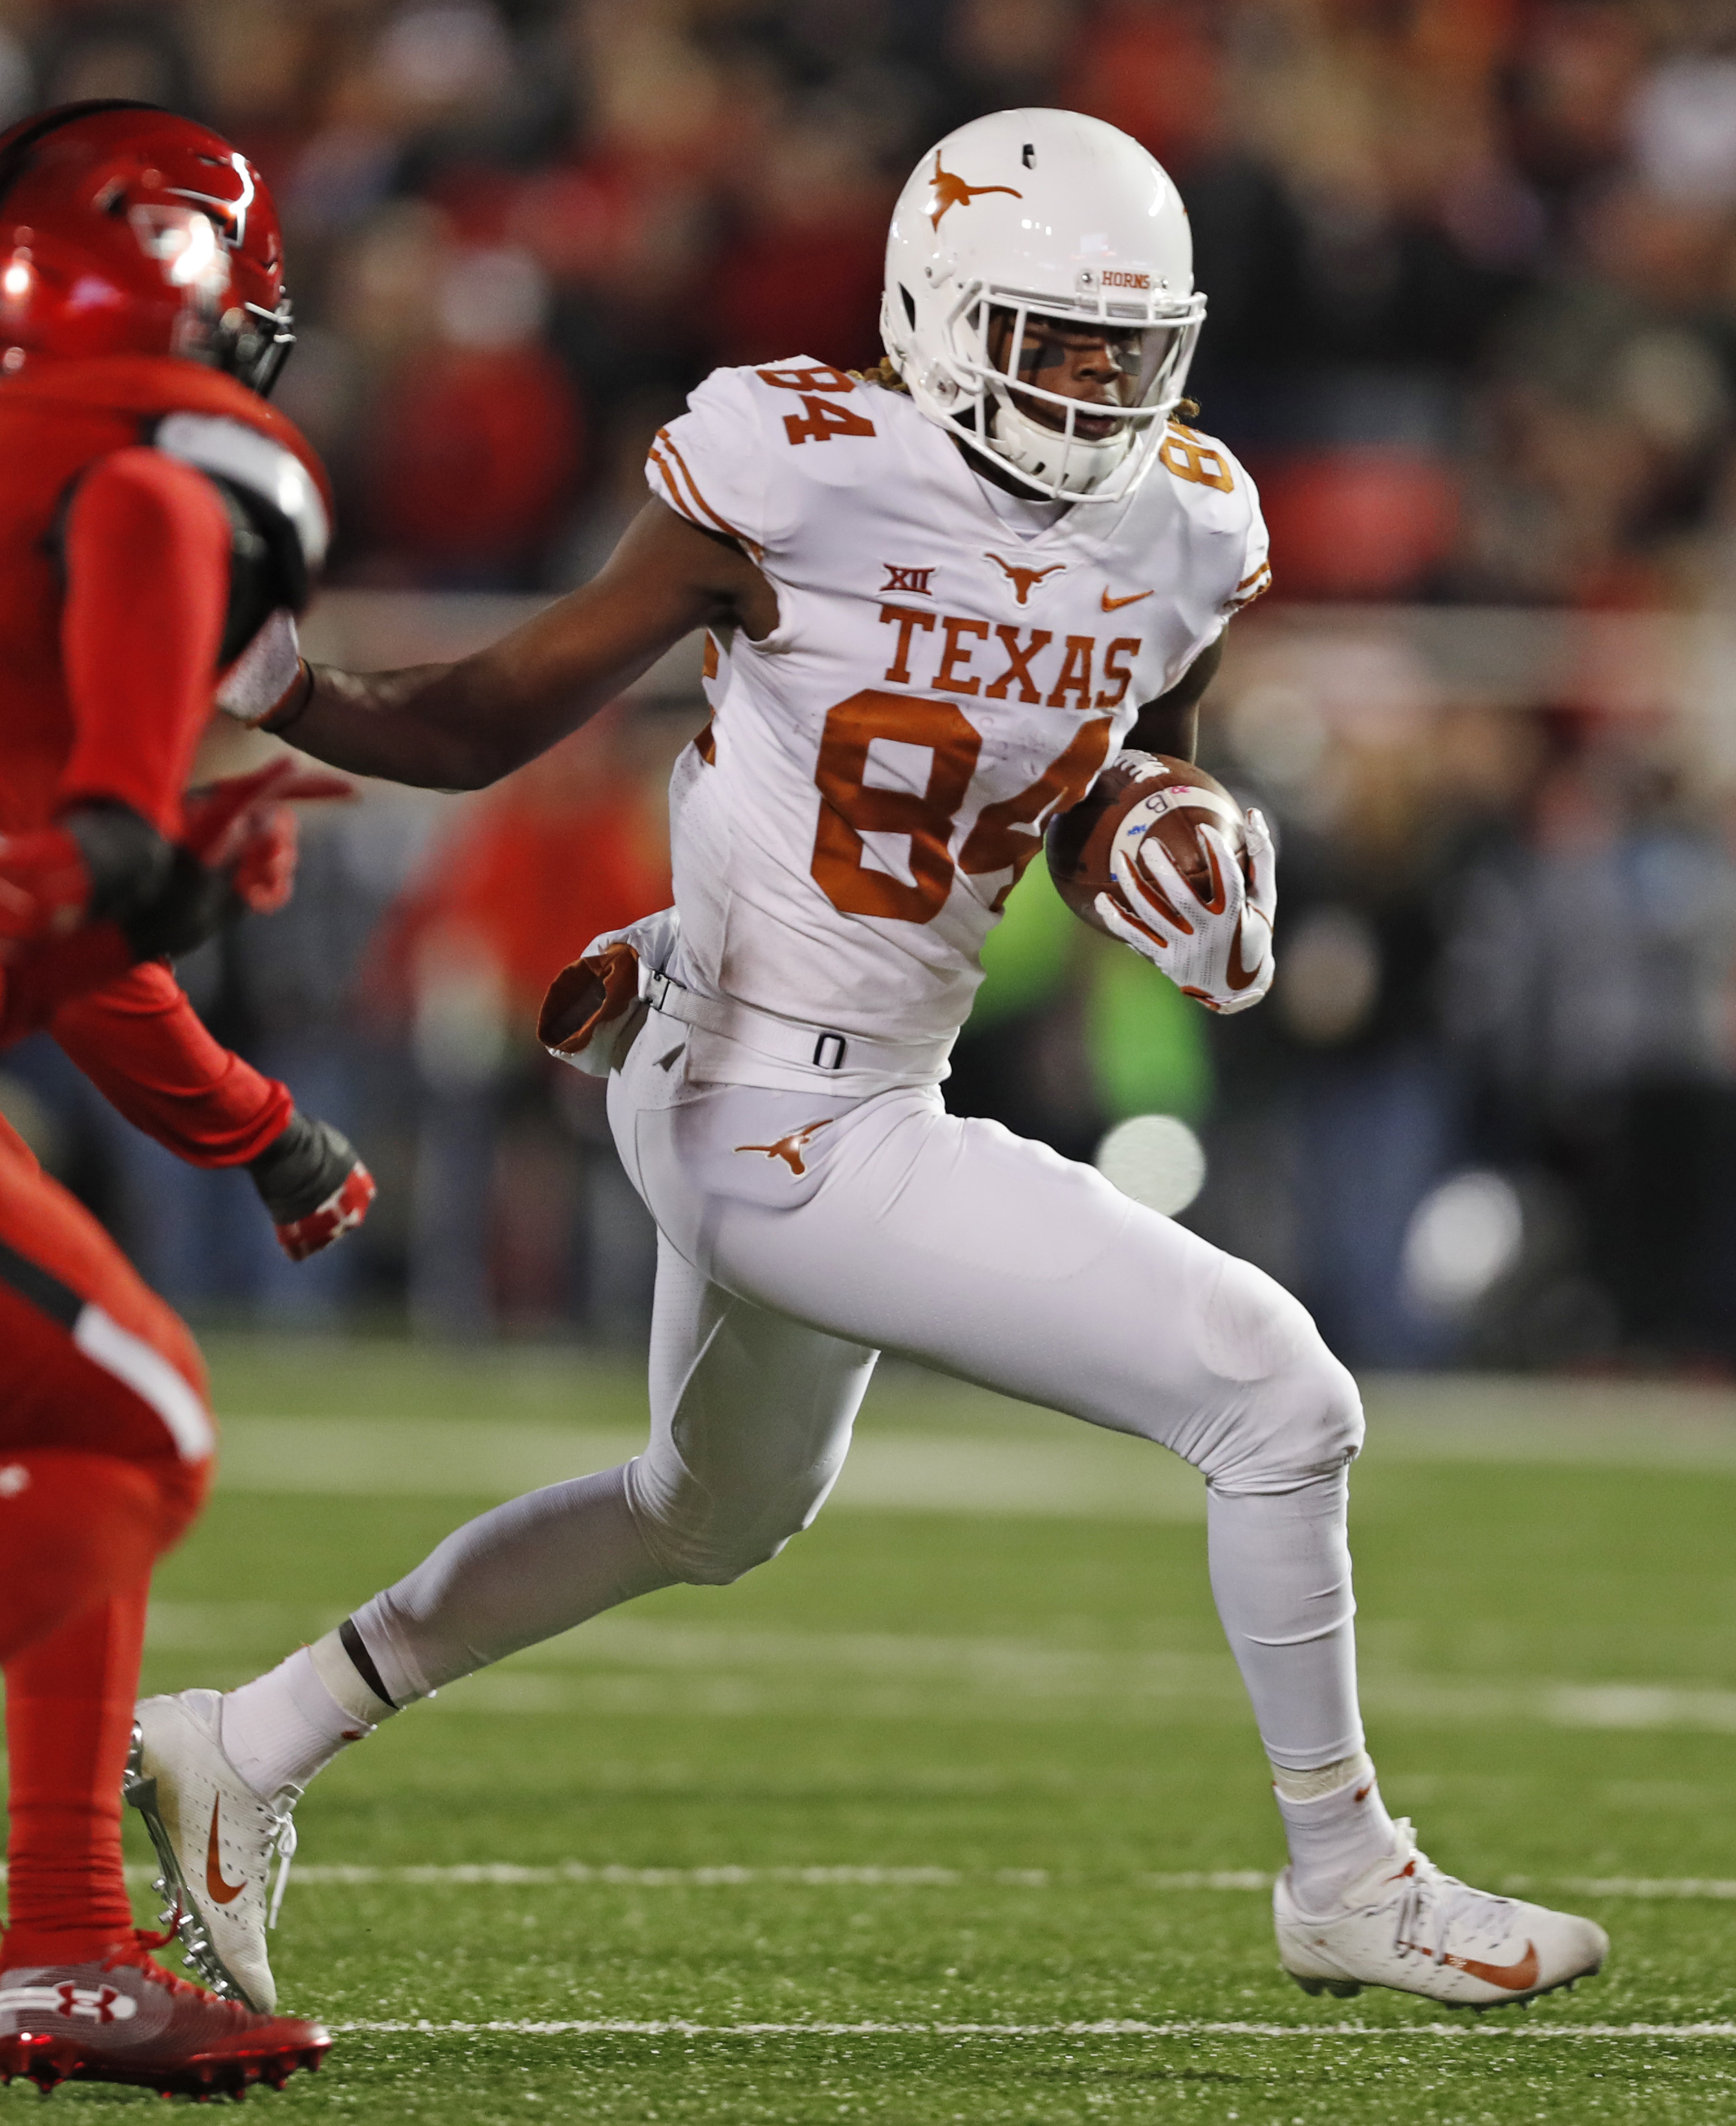 Elhlinger’s 4th TD lifts Texas to 41-34 win at Texas Tech